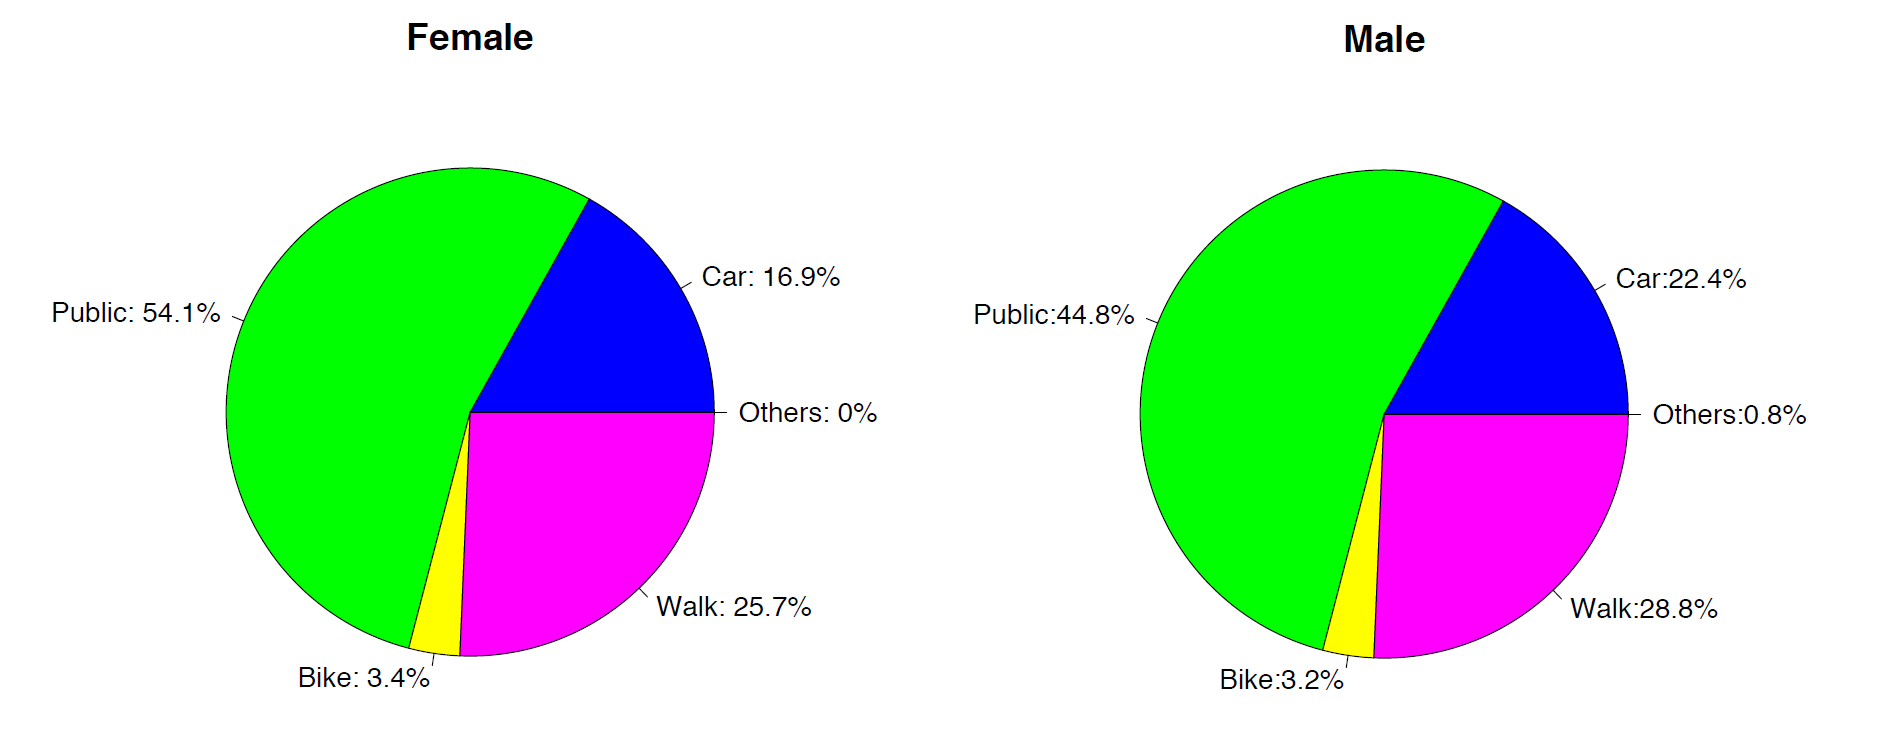 A pie chart for female on the left panel showing percentages of how female students came to school. Image description available.